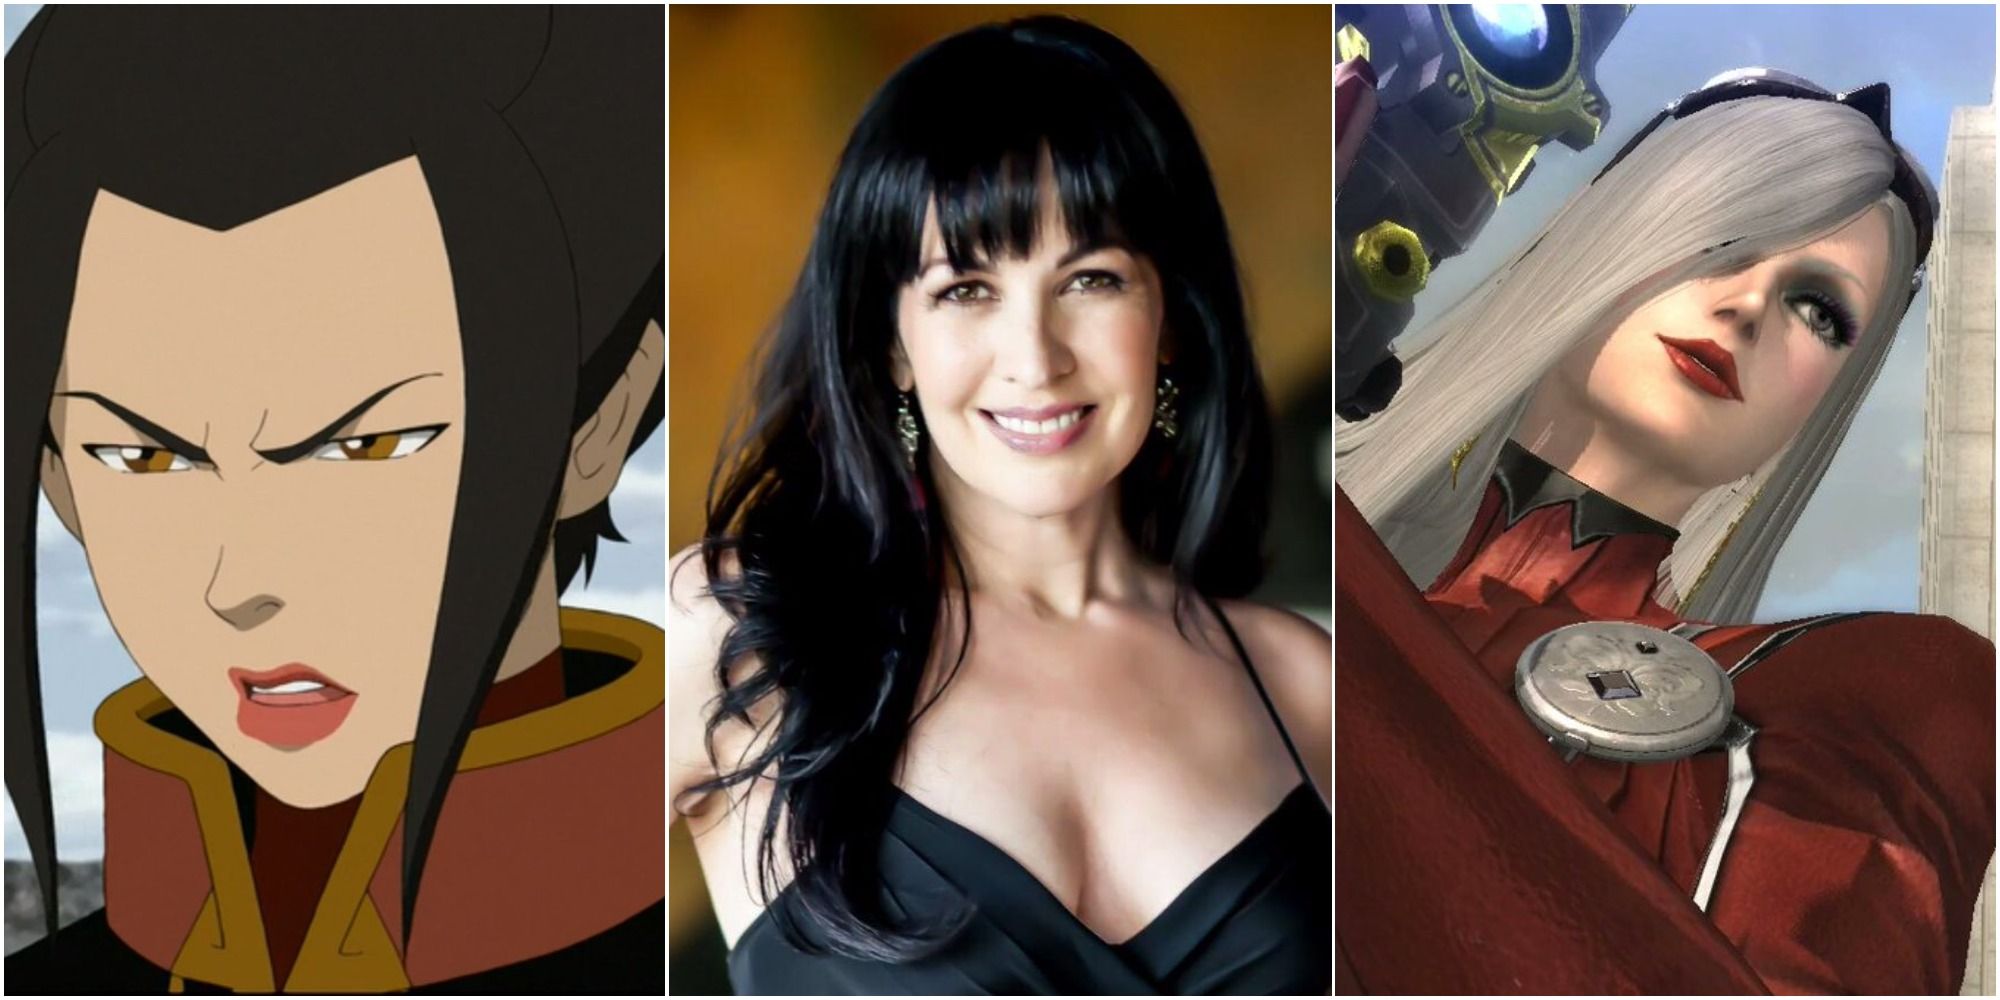 Princess Azula from Avatar: The Last Airbender (left) voice actress Grey Delisle-Griffin (middle) and Jeanne from Bayonetta 2 (right)